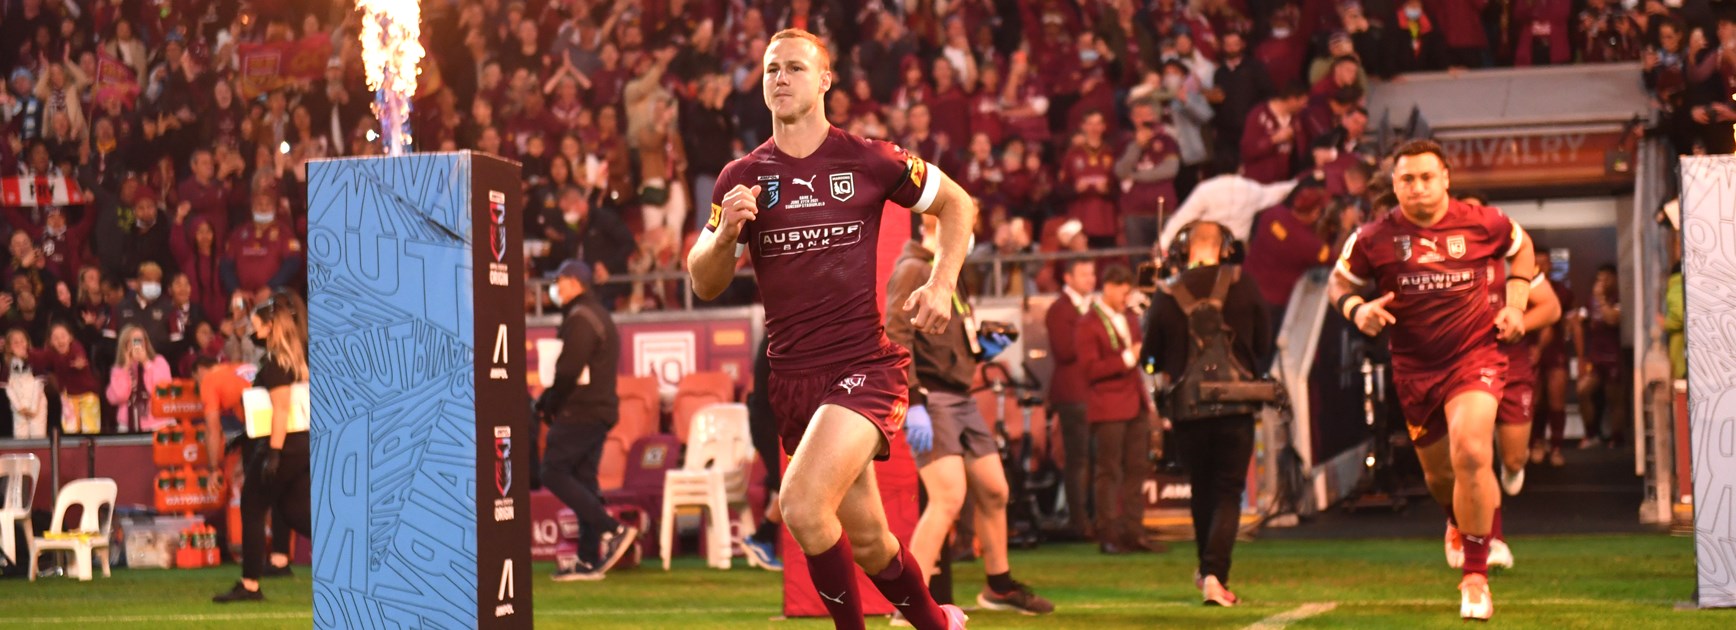 Daly Cherry-Evans to captain Maroons in fourth consecutive series